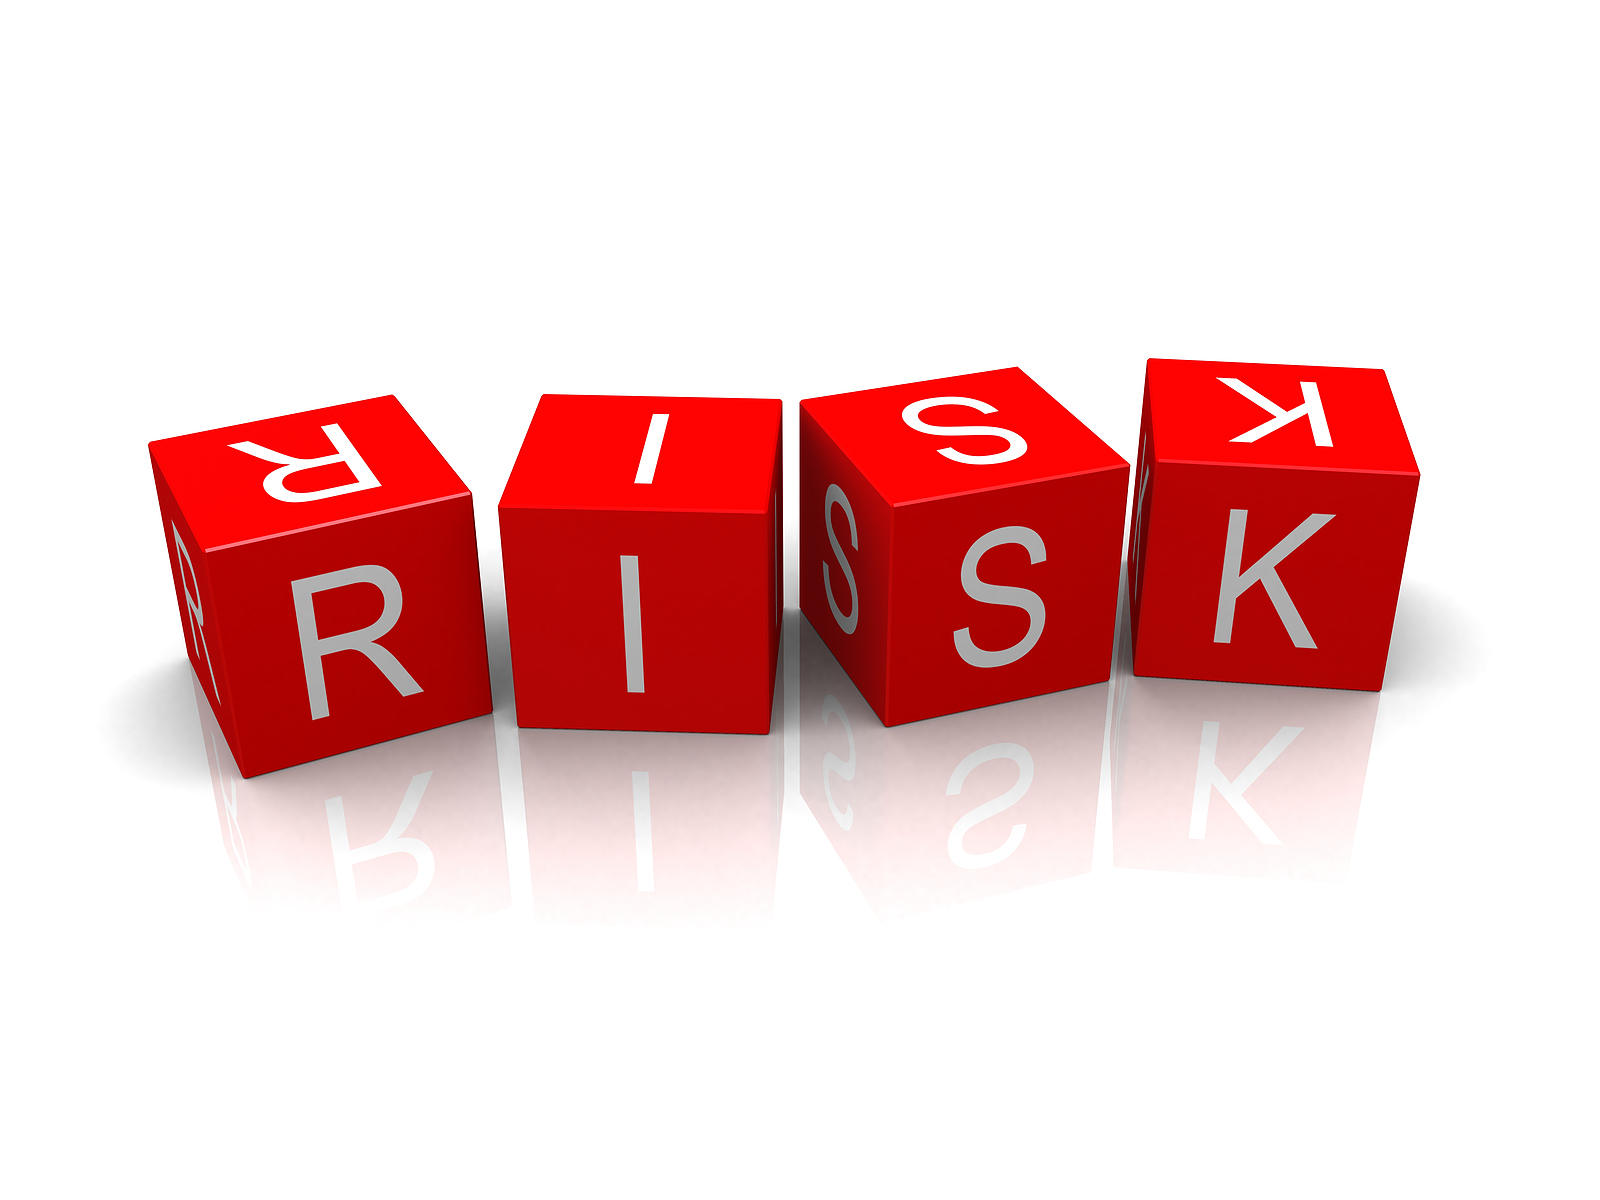 ISO31000 is a great guide for implementing risk principles